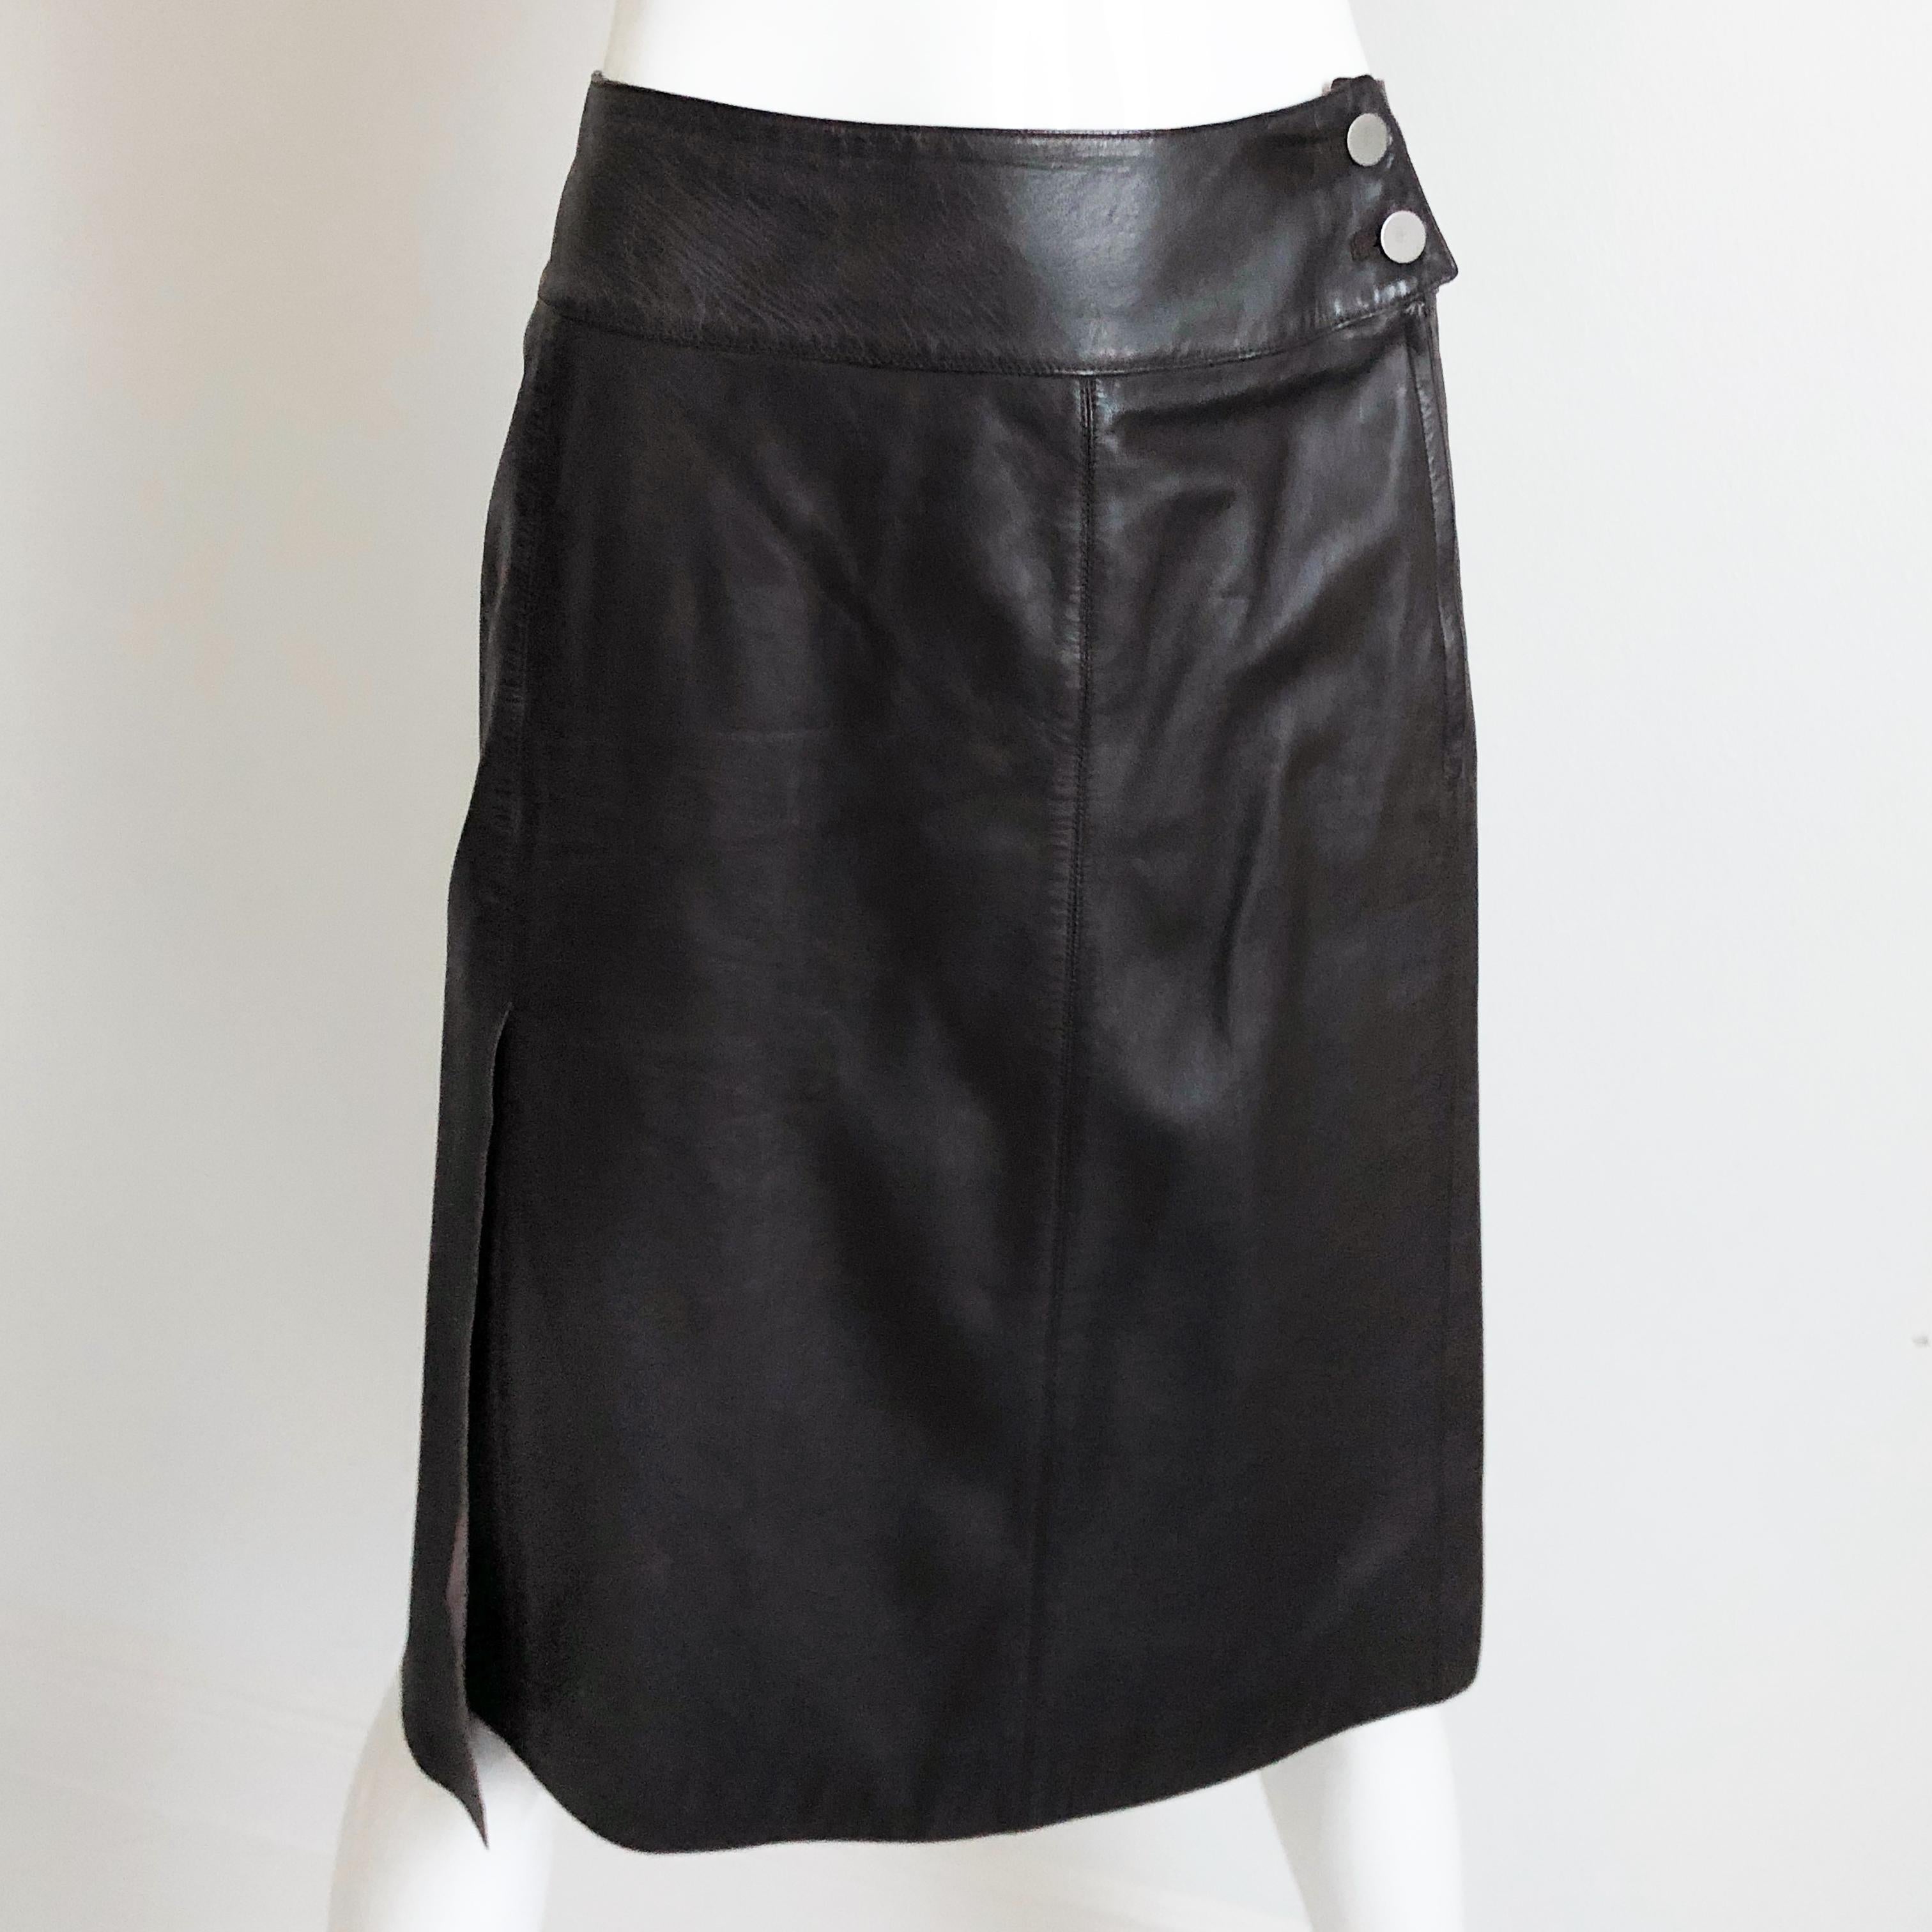 Authentic, preowned, vintage Chanel leather skirt, from the 99P collection.  Made from a buttery soft mocha brown lambskin, it features a slick asymmetric side vent and CC logo stamped buttons.  Fully-lined.  Dry Clean/Leather Clean only.

This